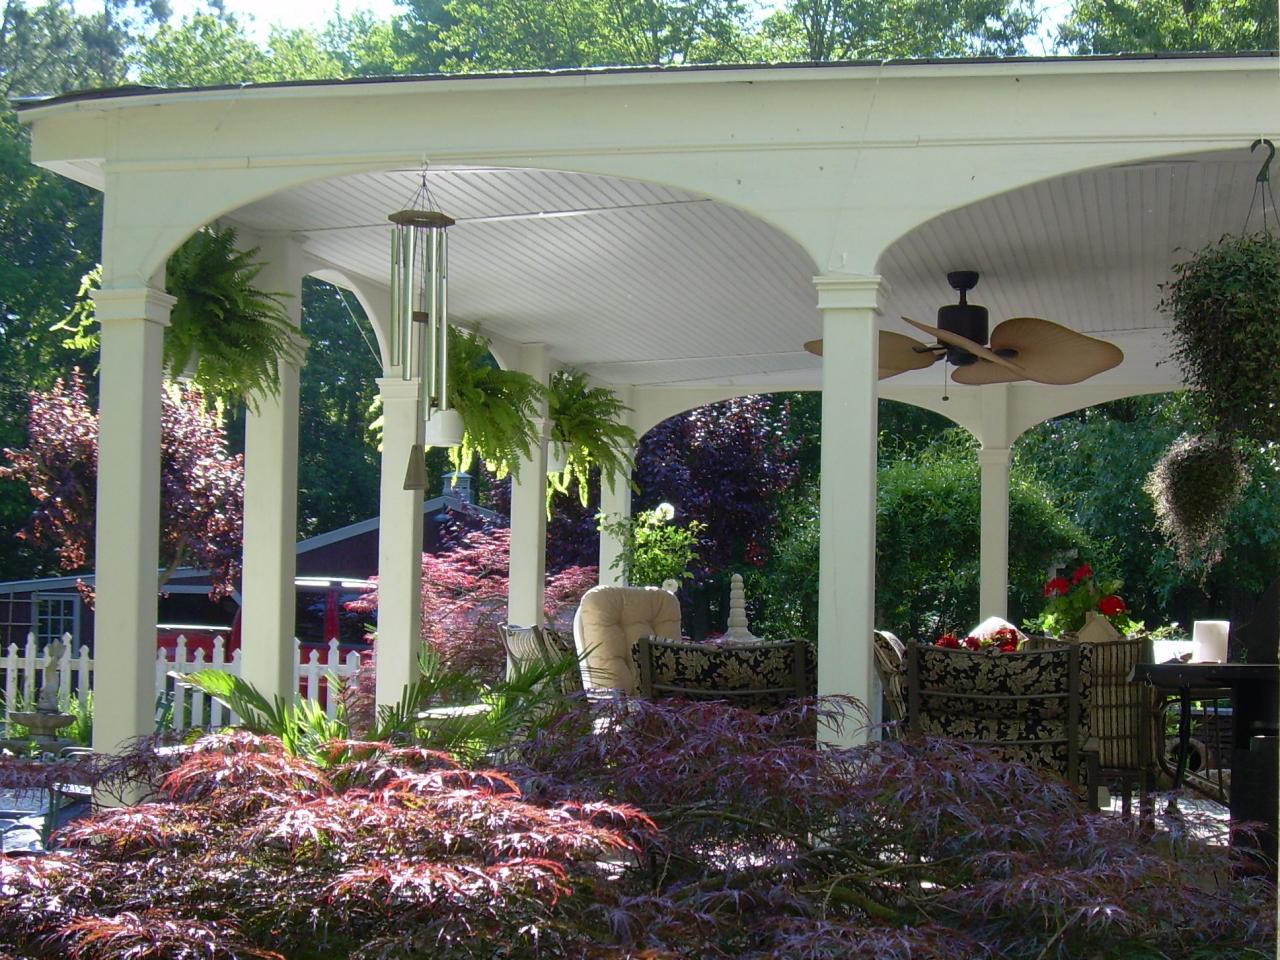 patio overlooking lush garden arches add a classic style to this 